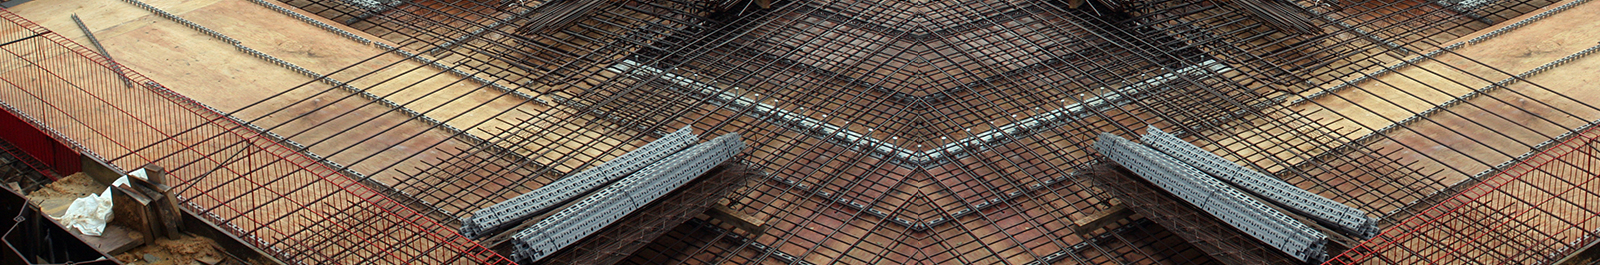 Formwork Panels manufacturer and supplier in Hyderabad India | PAAM Group